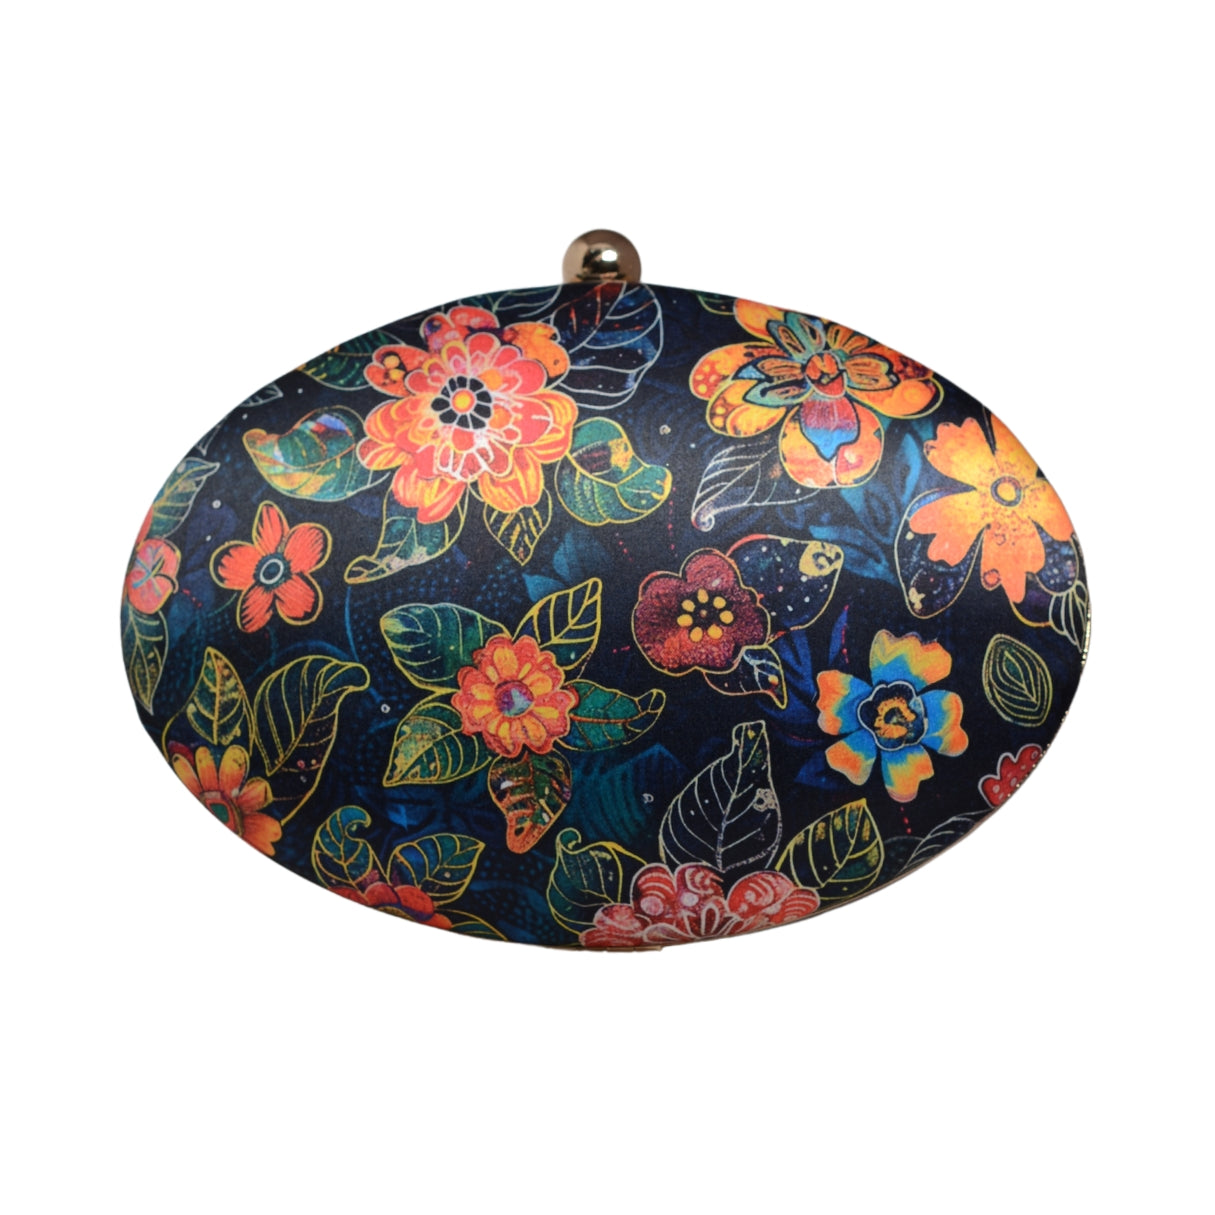 Black Floral And Leaves Printed Oval Clutch